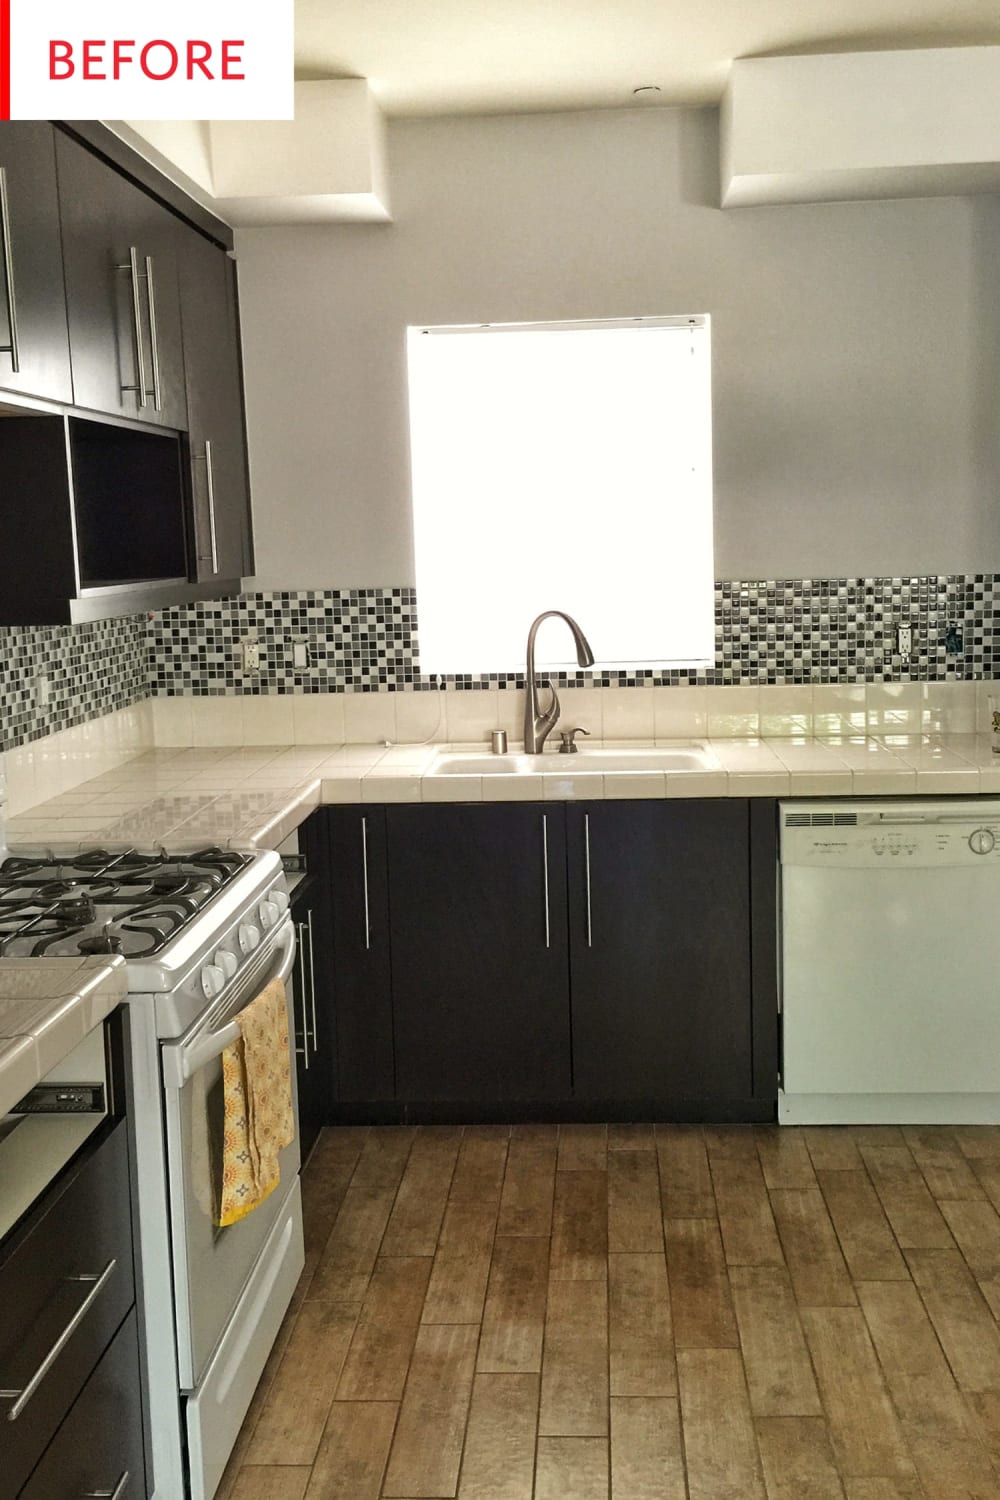 Before and After: 3 Changes Made a Big Difference in This $12K Kitchen